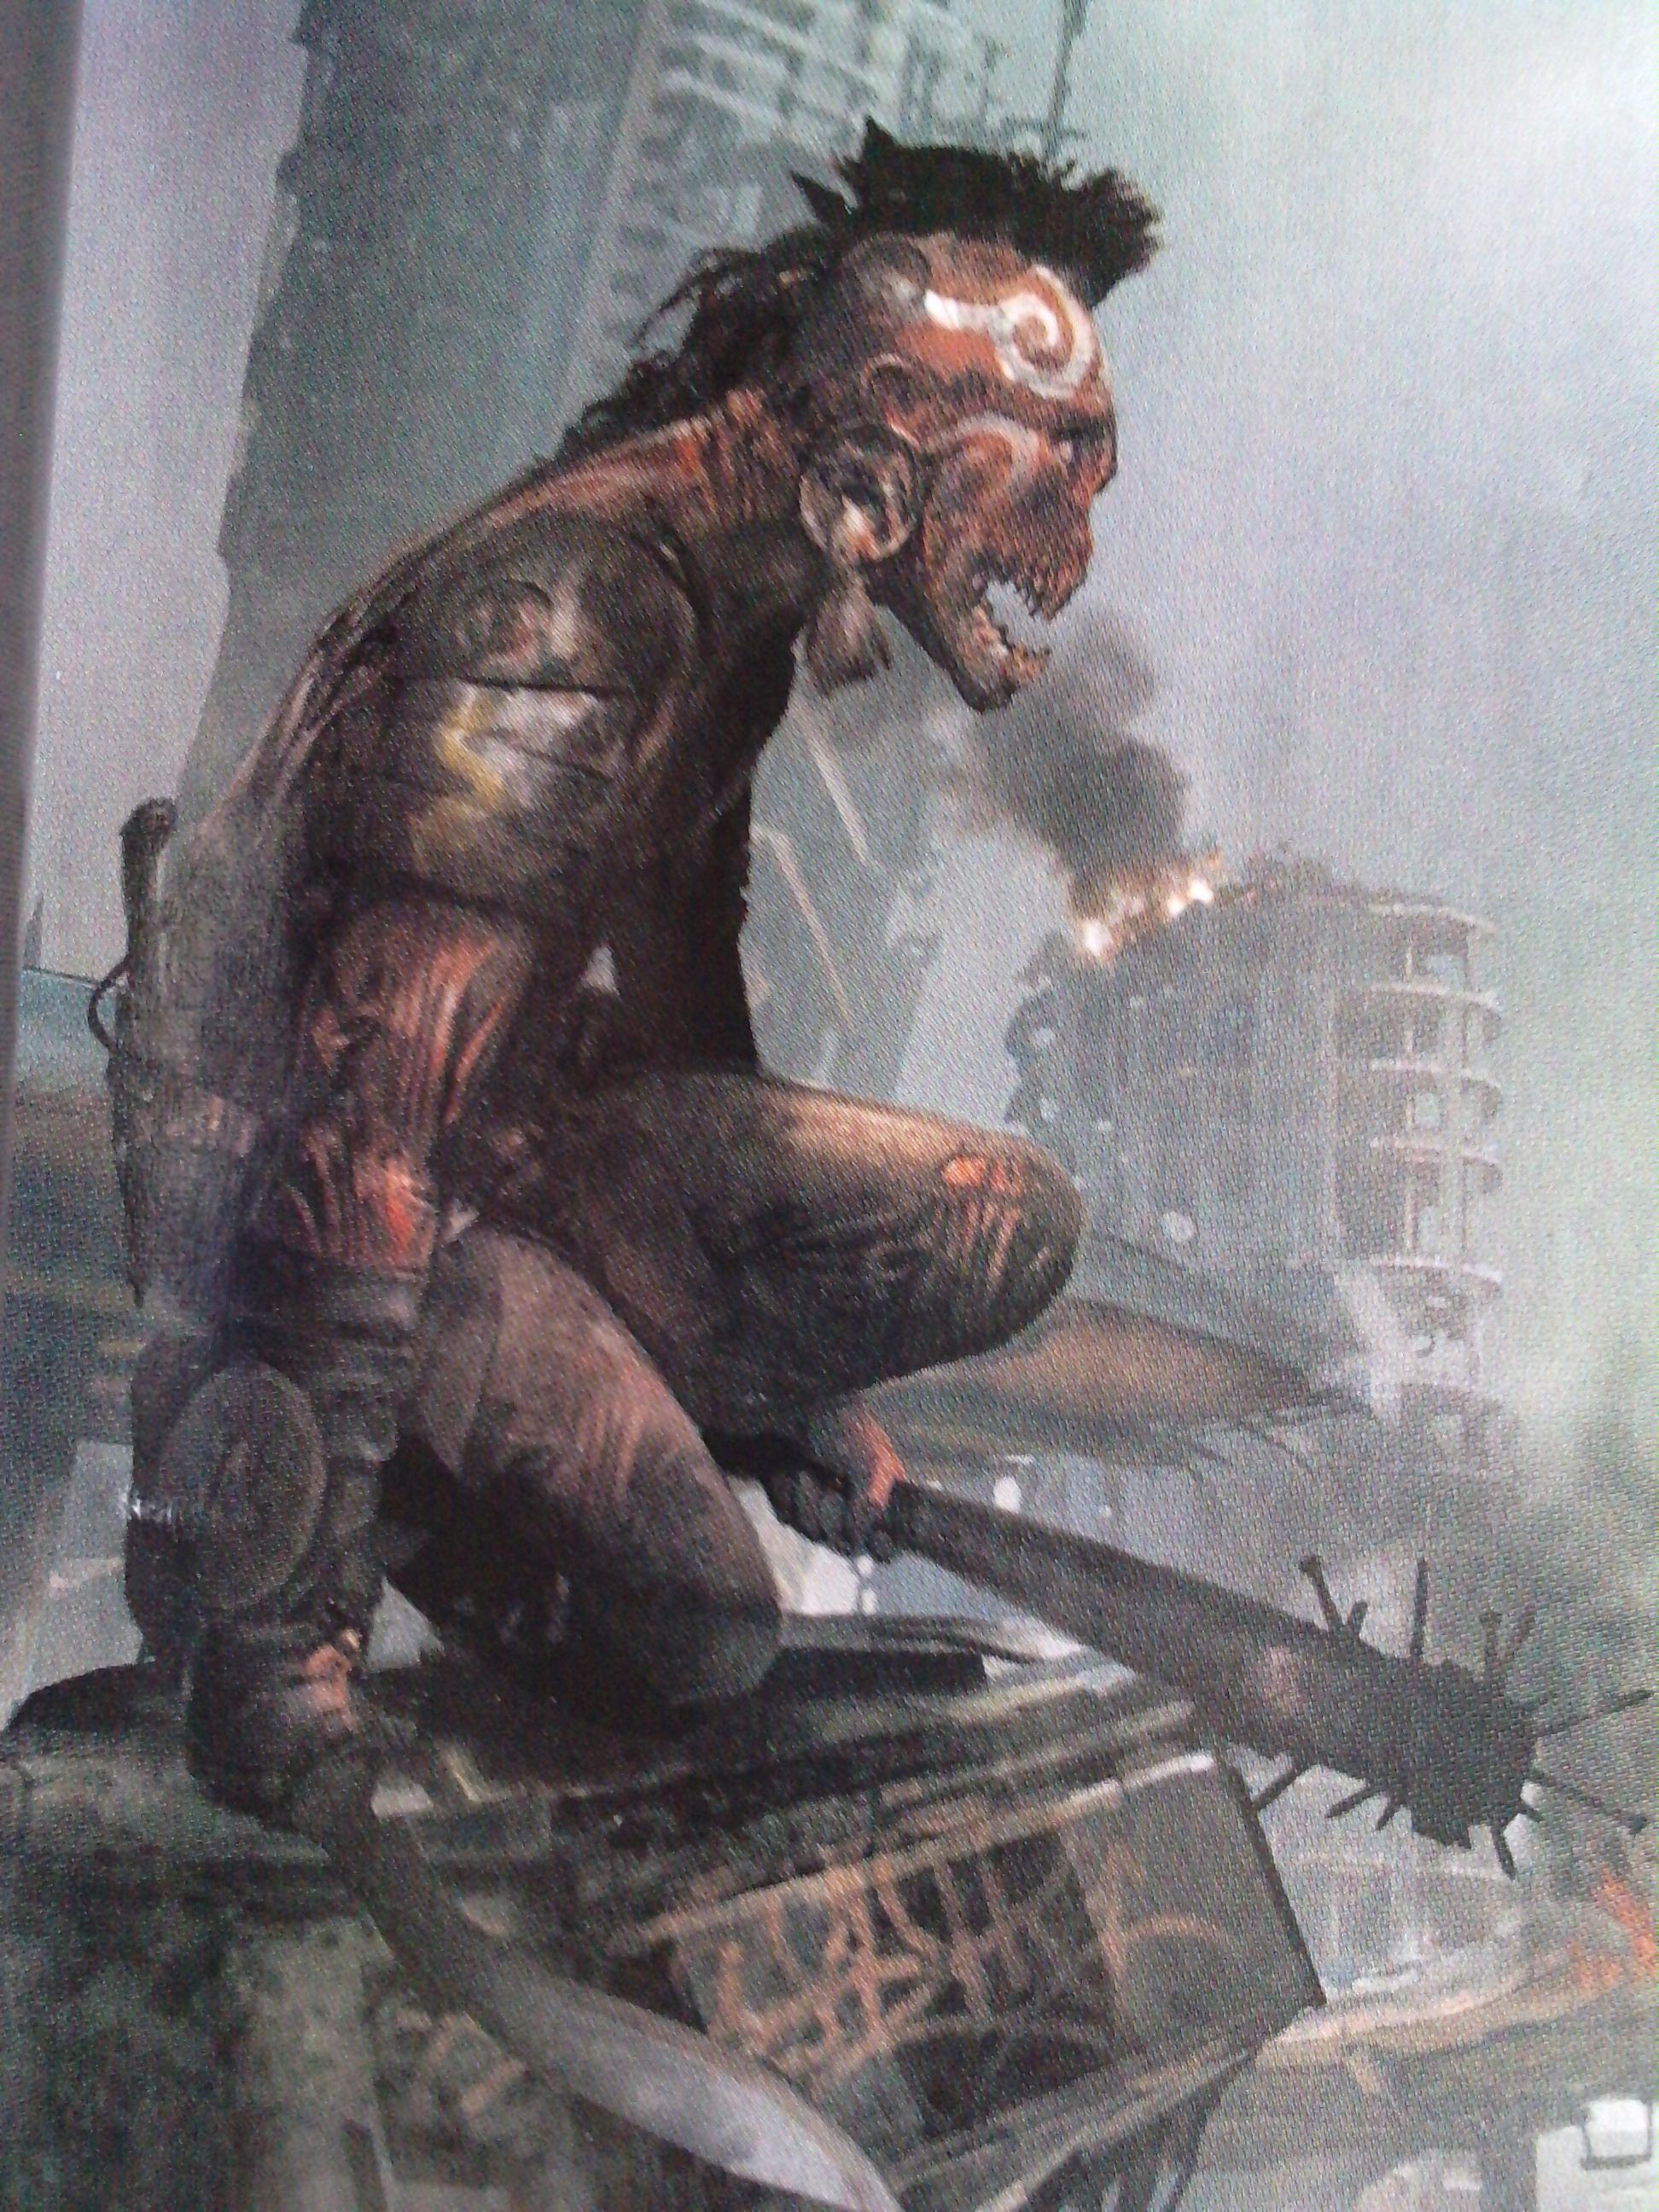 The original look of a mutant from RAGE isnt he awesome